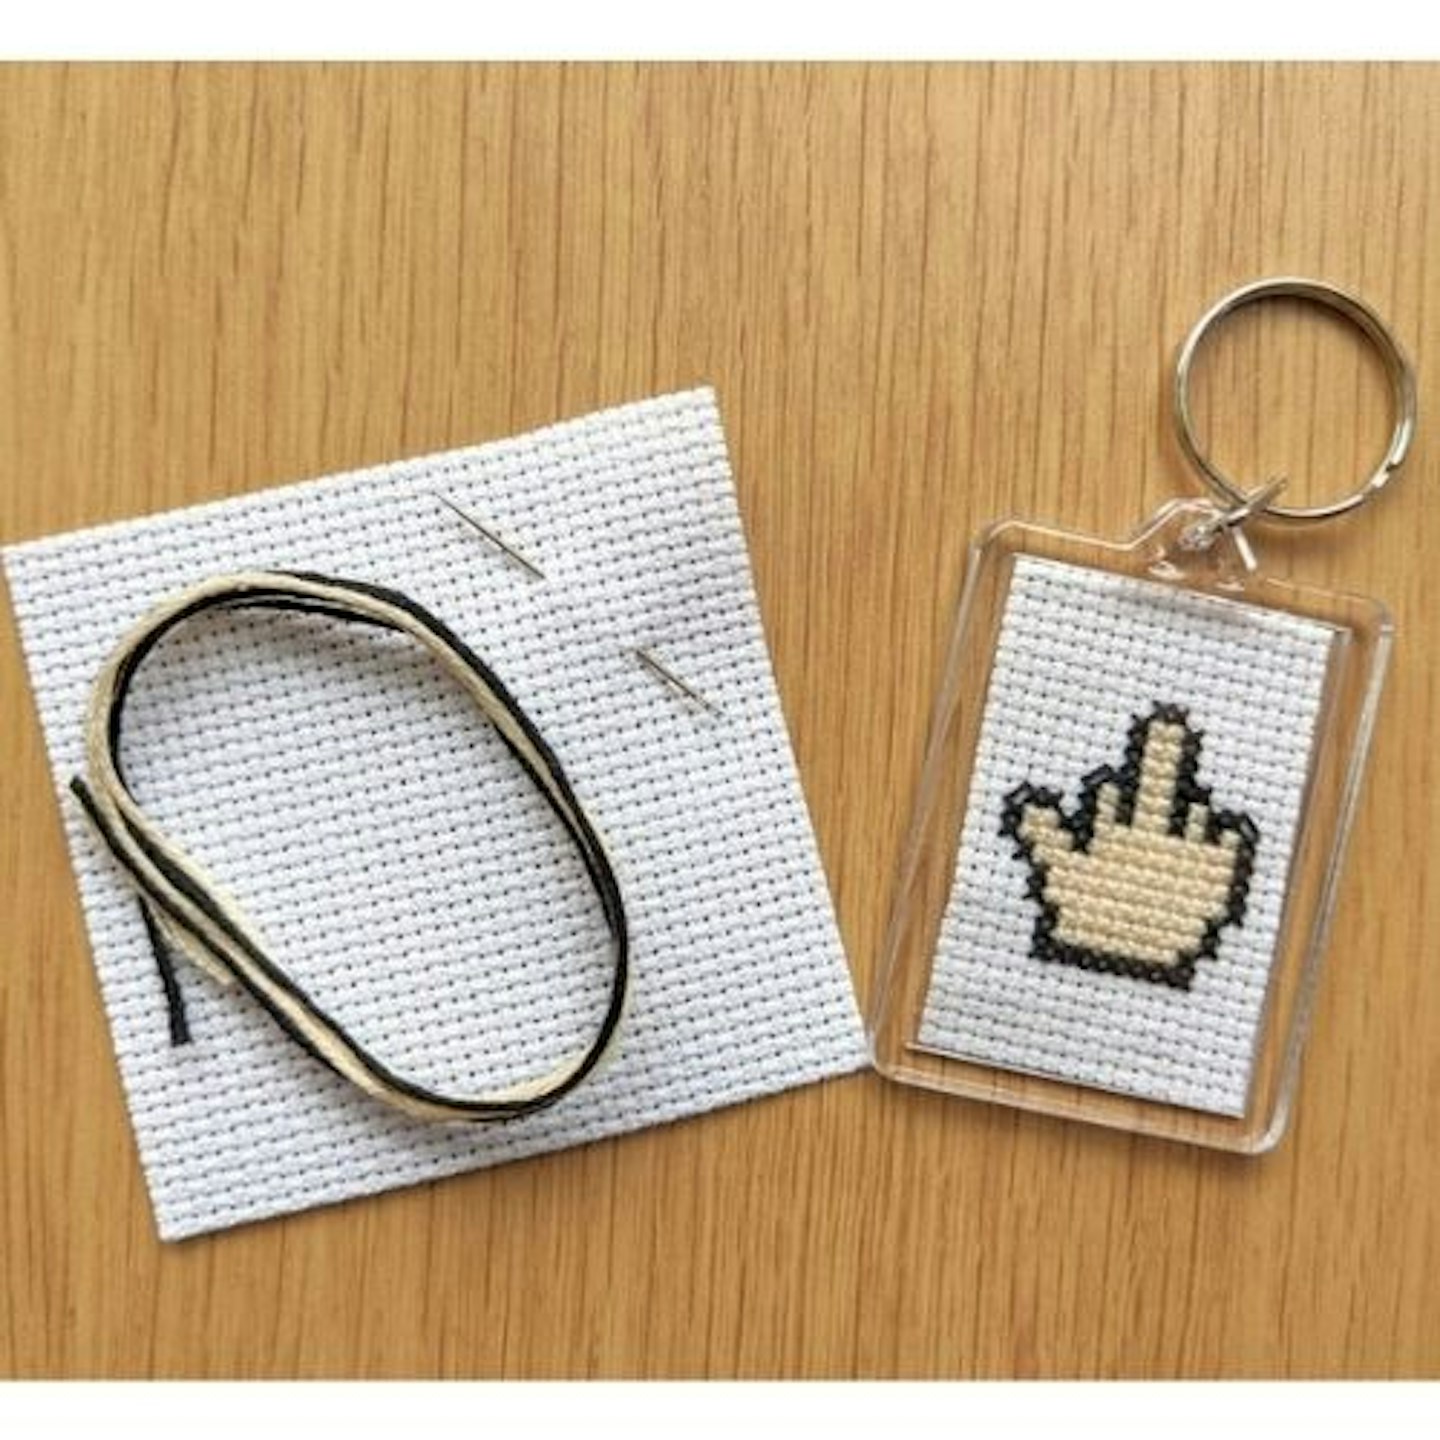 Funny Cross Stitch Kit For Adult Beginners- You Succ- Curious Twist :  : Handmade Products